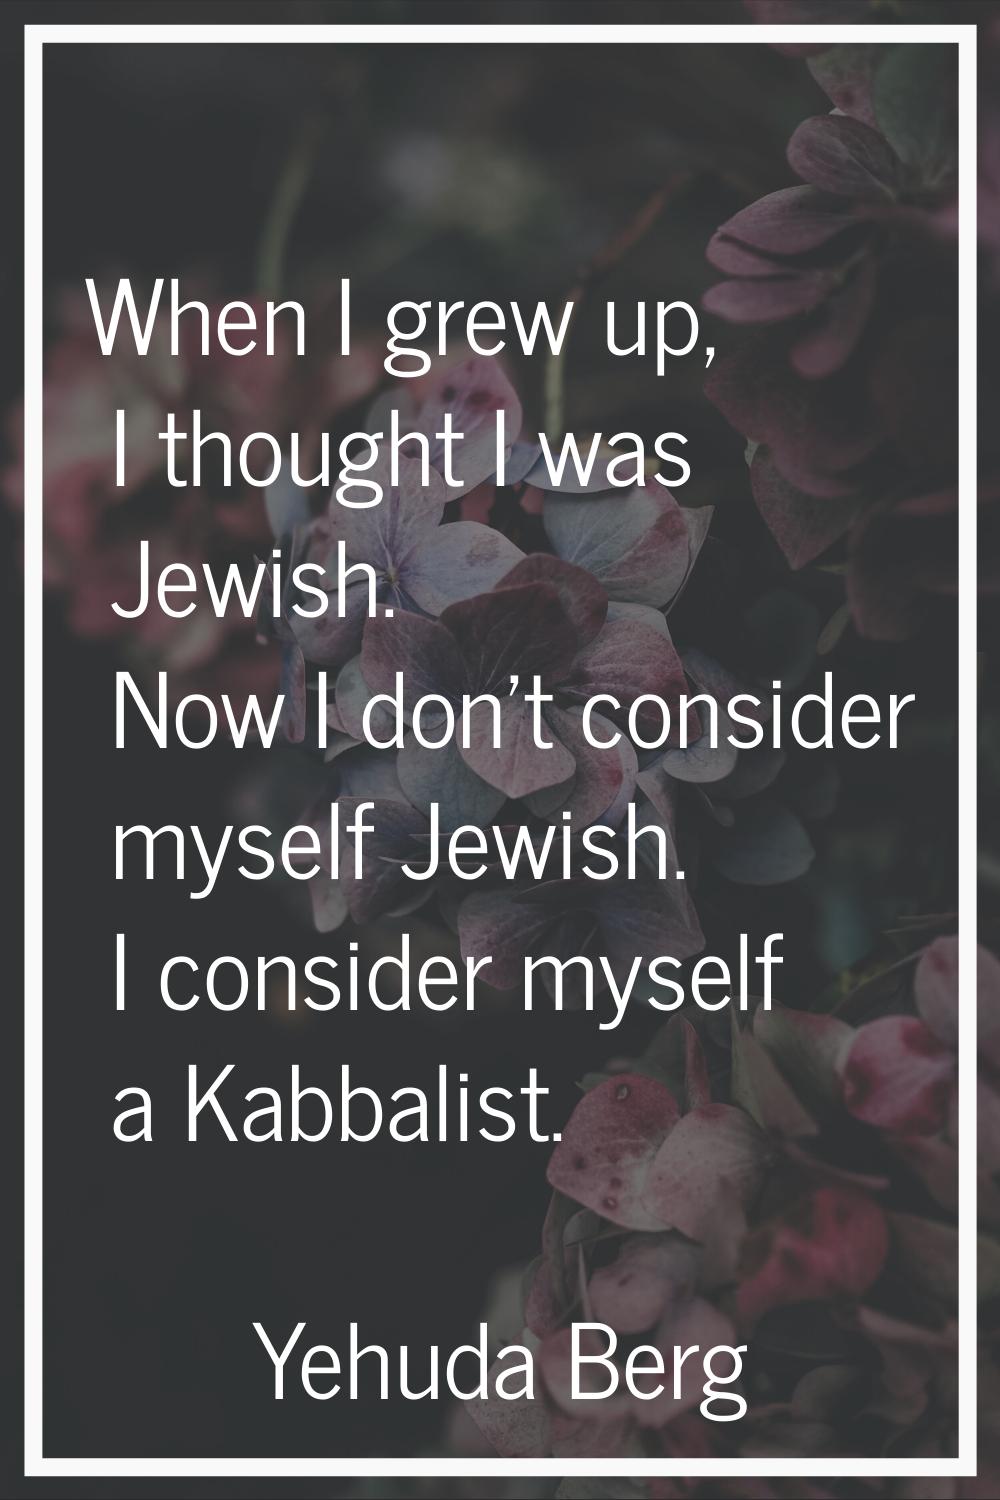 When I grew up, I thought I was Jewish. Now I don't consider myself Jewish. I consider myself a Kab